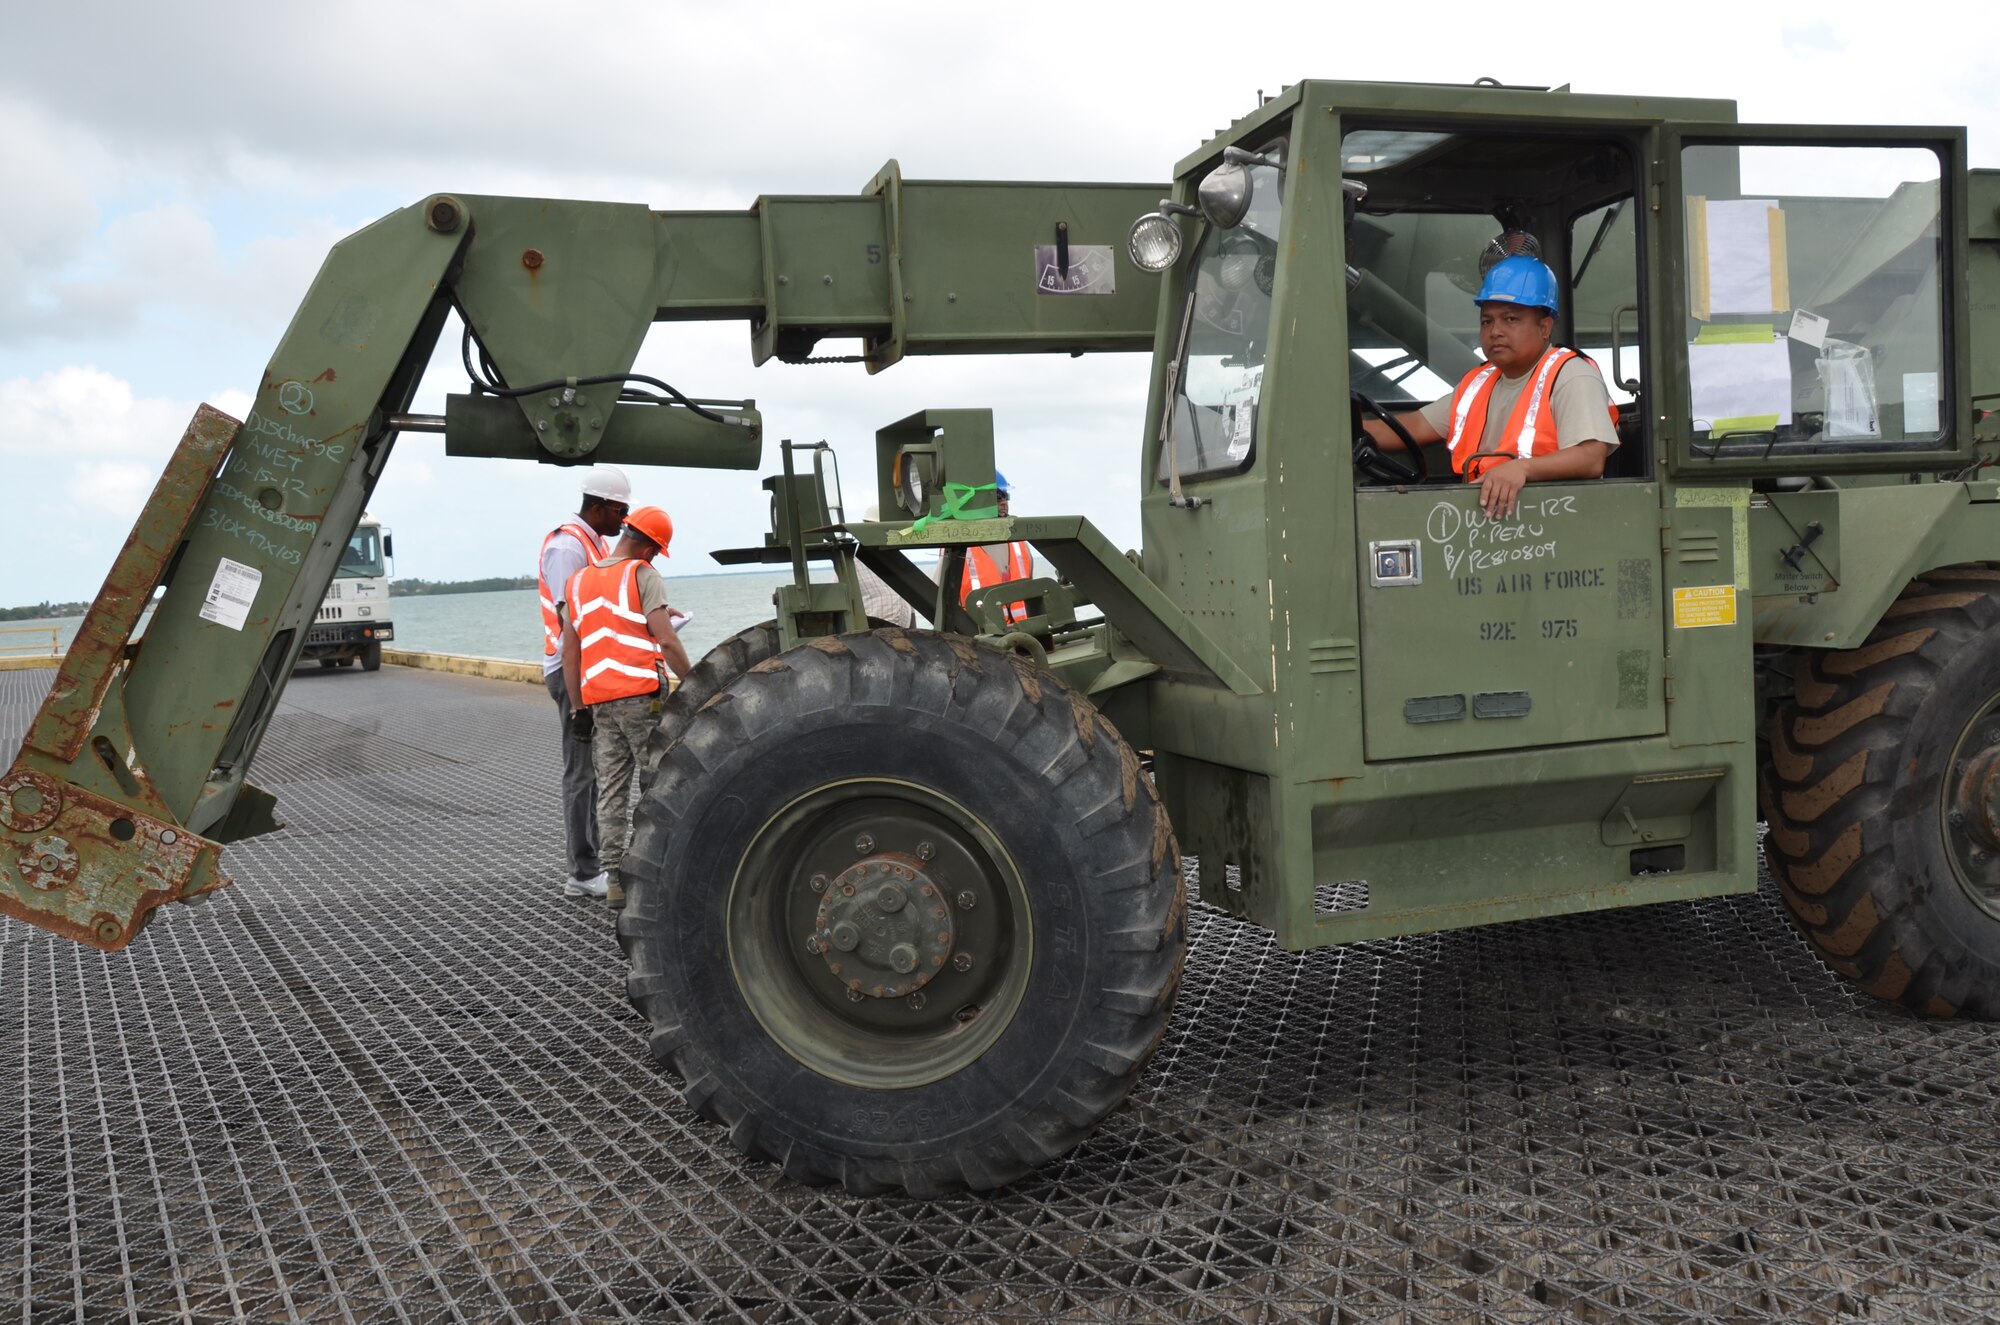 Master Sgt. Enrique Naranjo, New Horizons logistics superintendent, drives a piece of engineering equipment off of the barge, March 8. Belizeans will begin noticing an influx of U.S. military equipment traveling from the Port of Belize to various locations throughout the country in support of New Horizons. (USAF photo by Master Sgt. Kelly Ogden/Released)